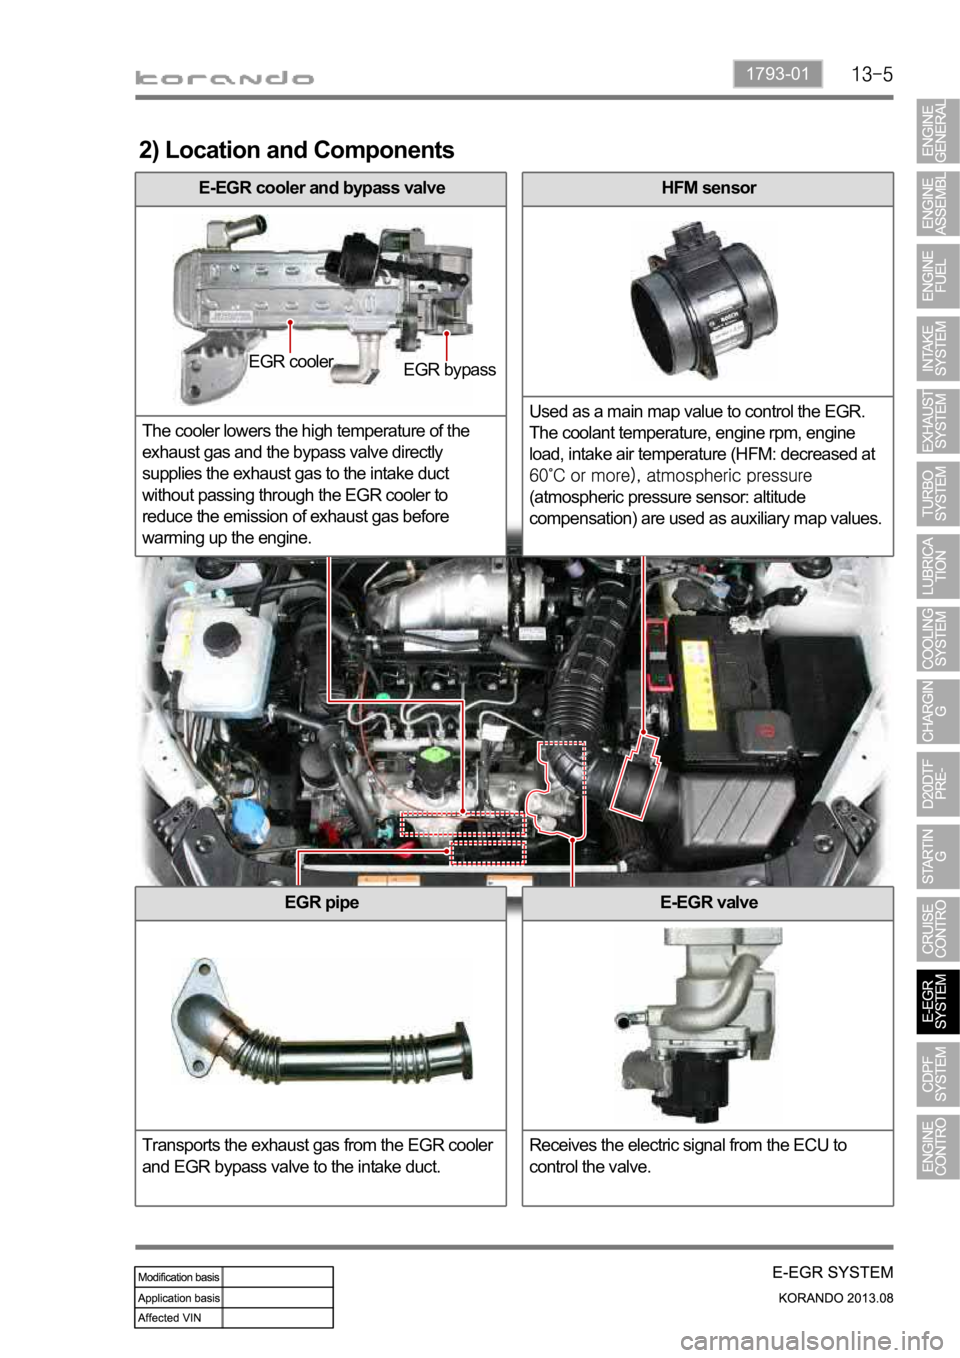 SSANGYONG KORANDO 2013  Service Manual 1793-01
2) Location and Components
HFM sensor
Used as a main map value to control the EGR. 
The coolant temperature, engine rpm, engine 
load, intake air temperature (HFM: decreased at 
(atmospheric p